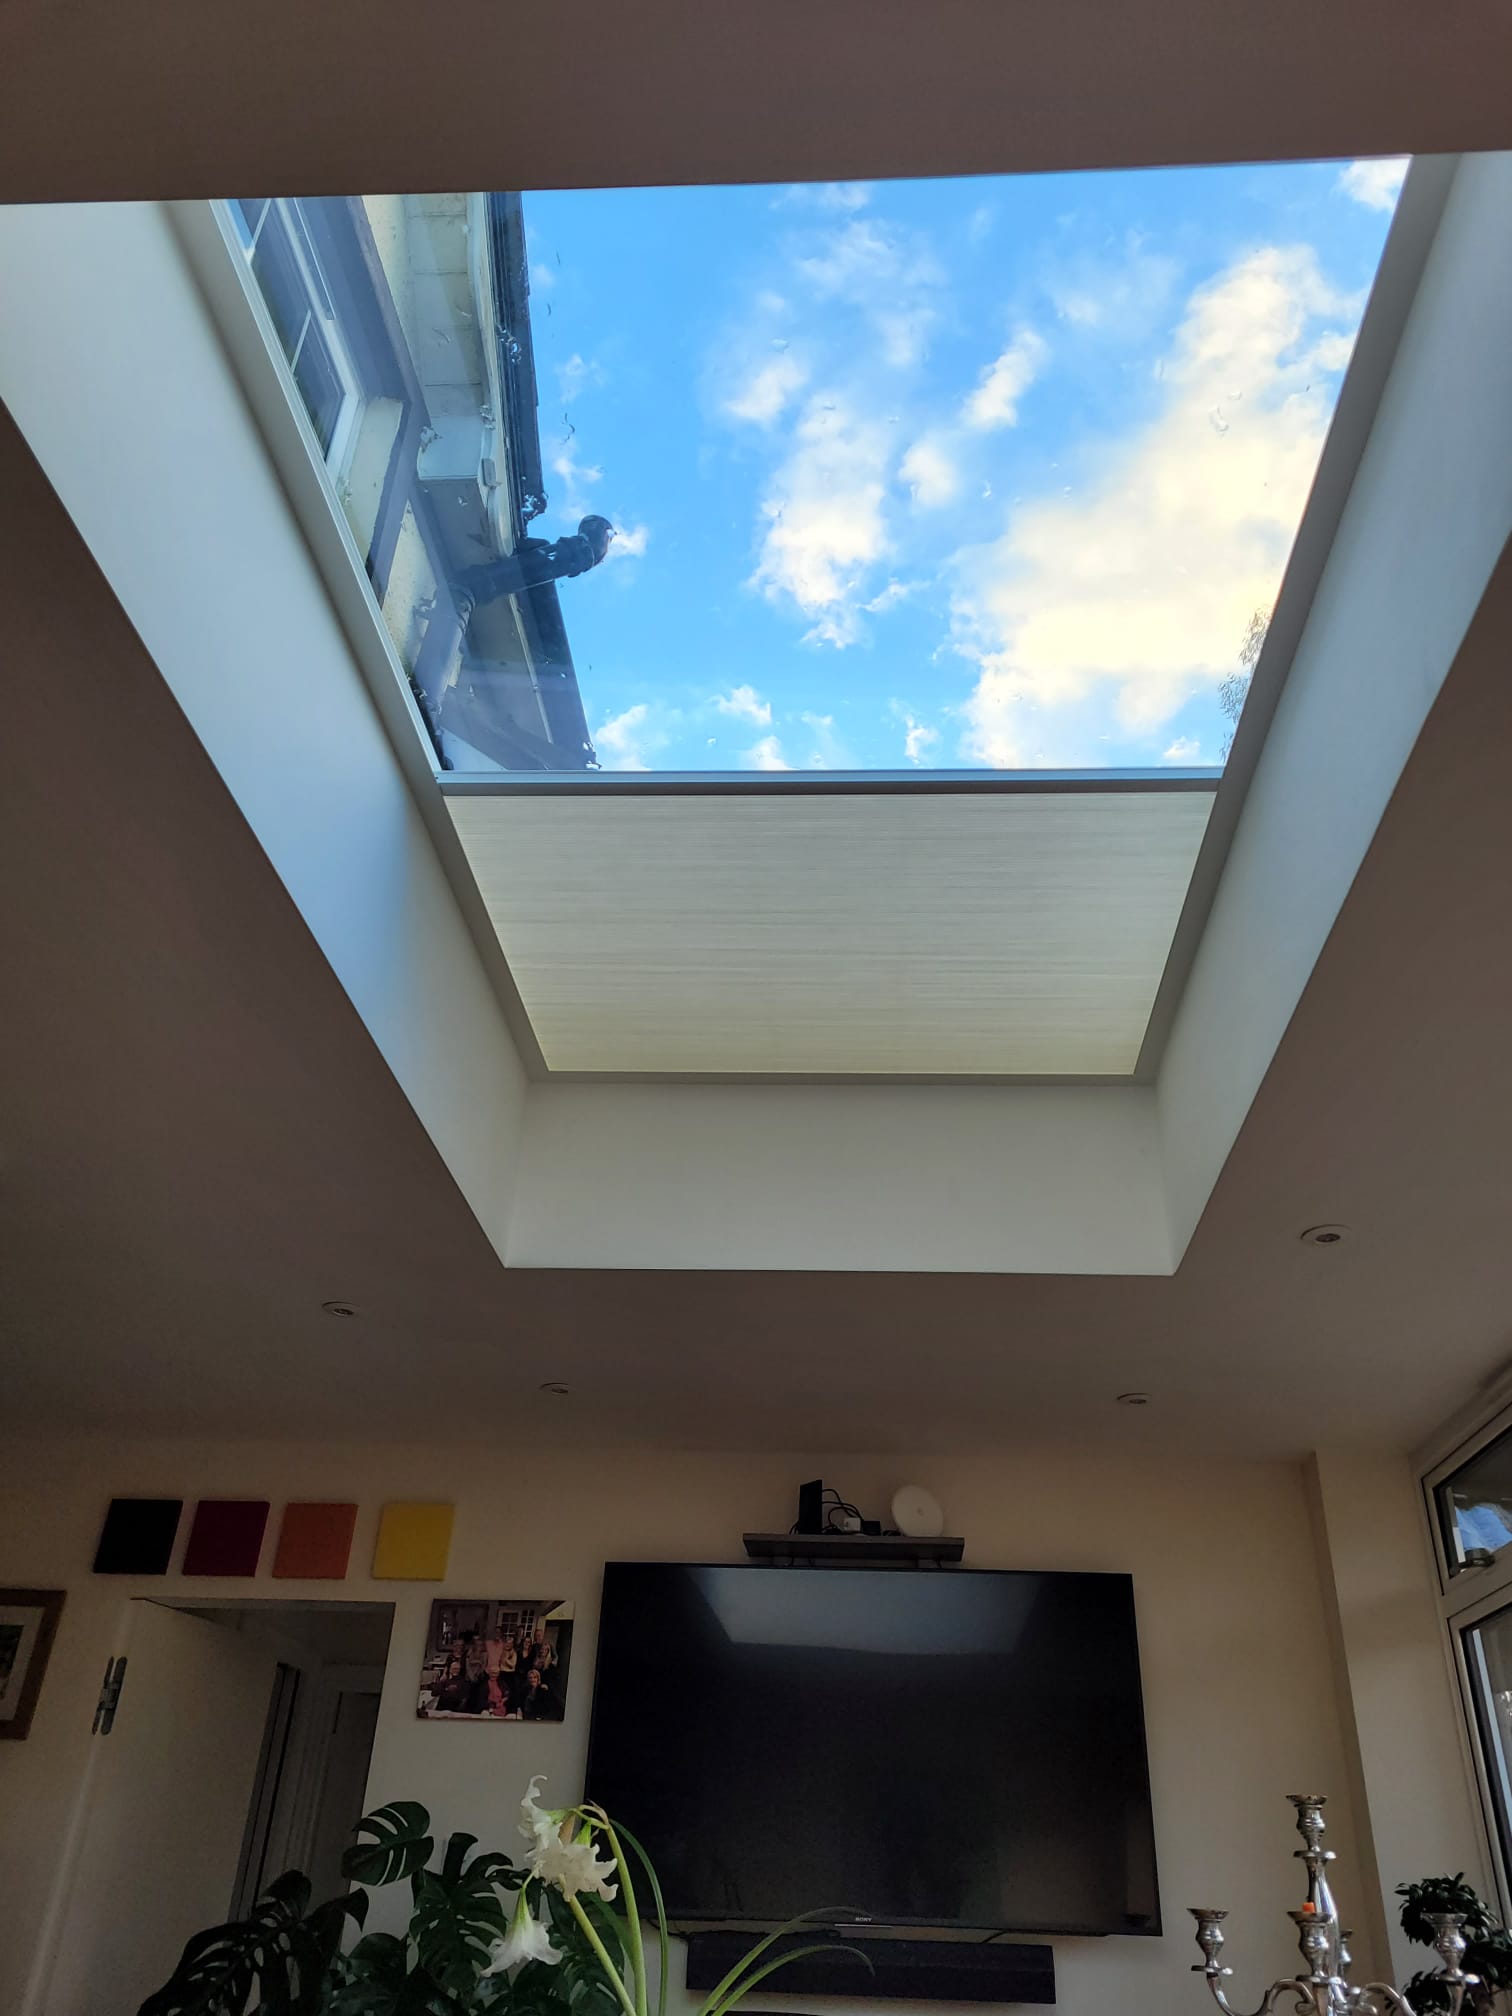 ClearView Lantern Roof Skylight Blinds